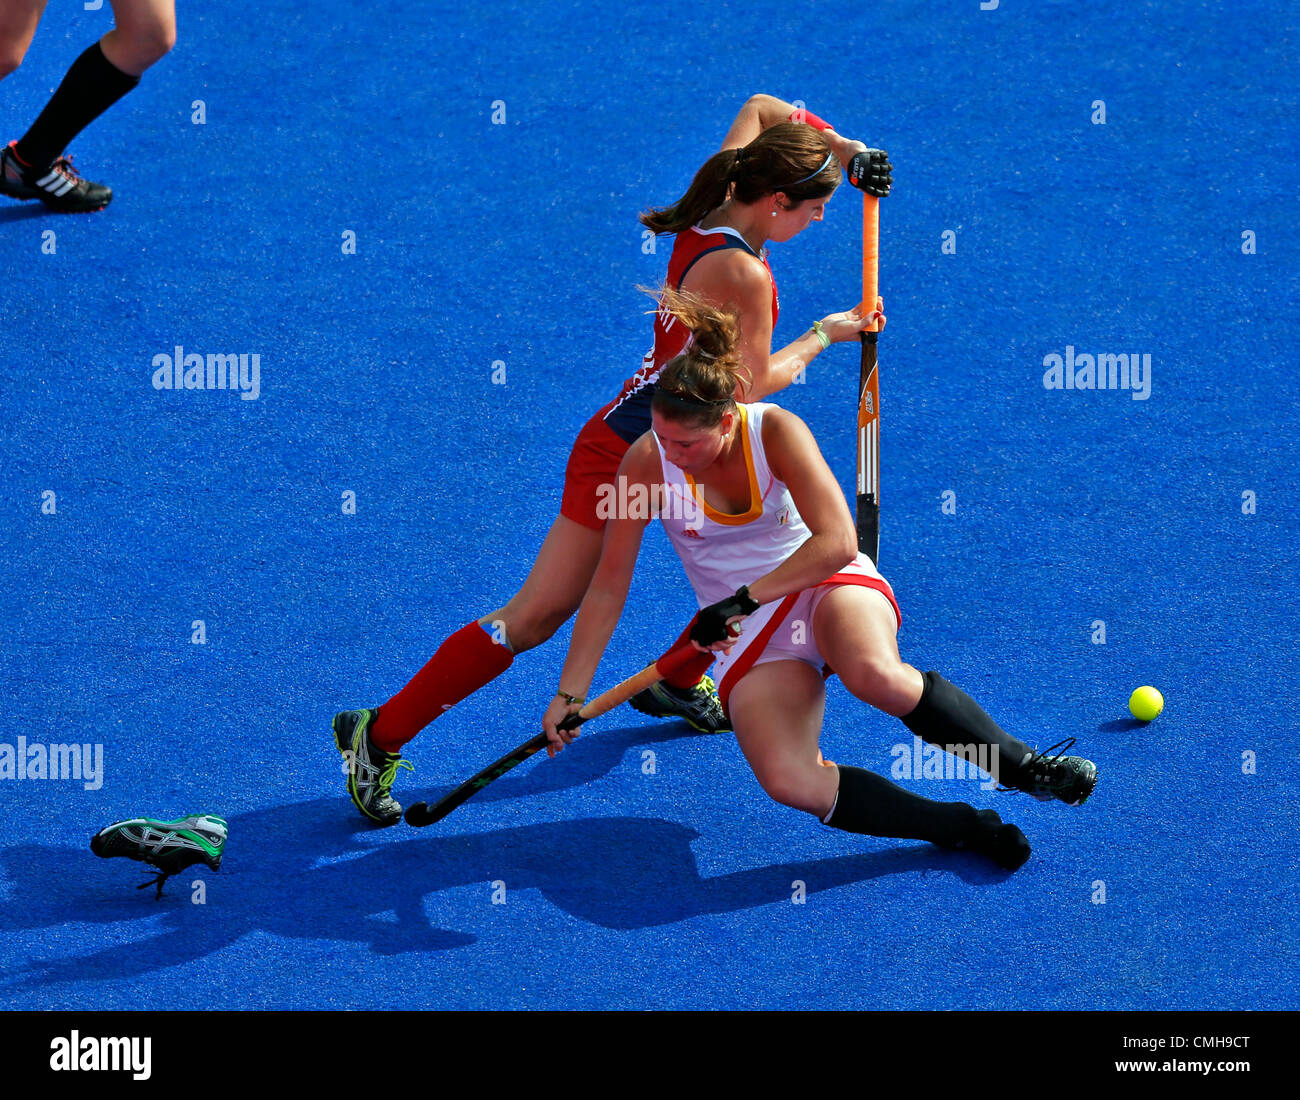 10.08.2012. London, England. Anouk Raes of Belgium competes with Rachel Dawson of USA during women's hockey classification 11th-12th match between Belgium and USA, at London 2012 Olympic Games in London, Britain, on August 10, 2012. Belgium won 2-1. Stock Photo